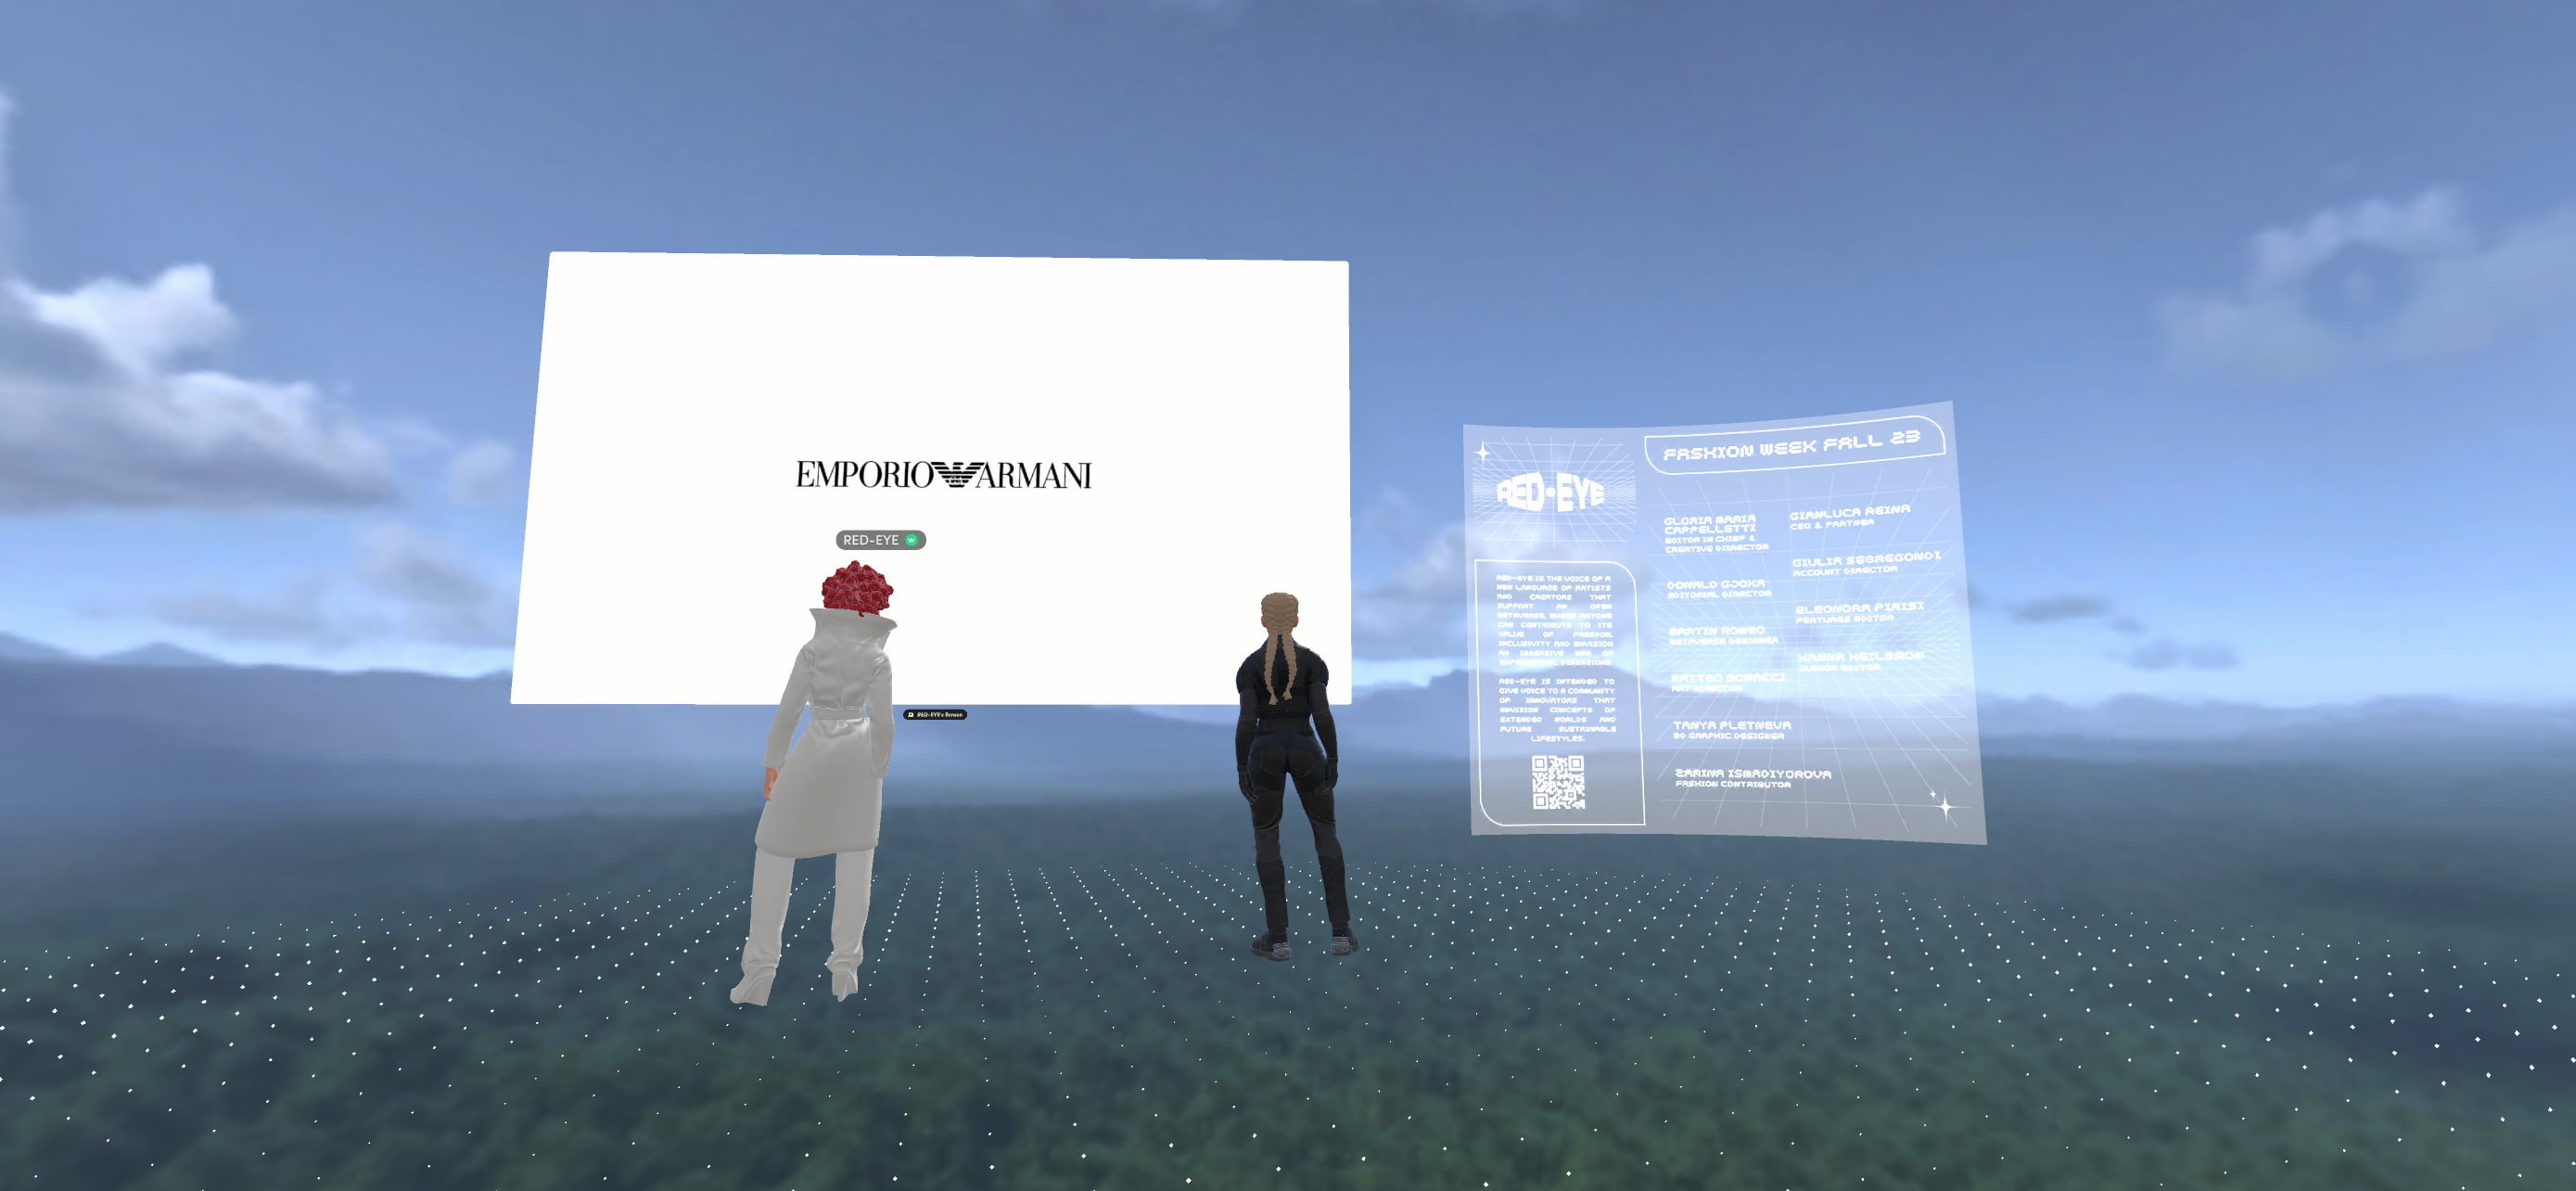 Setting up the live stream in the Metaverse